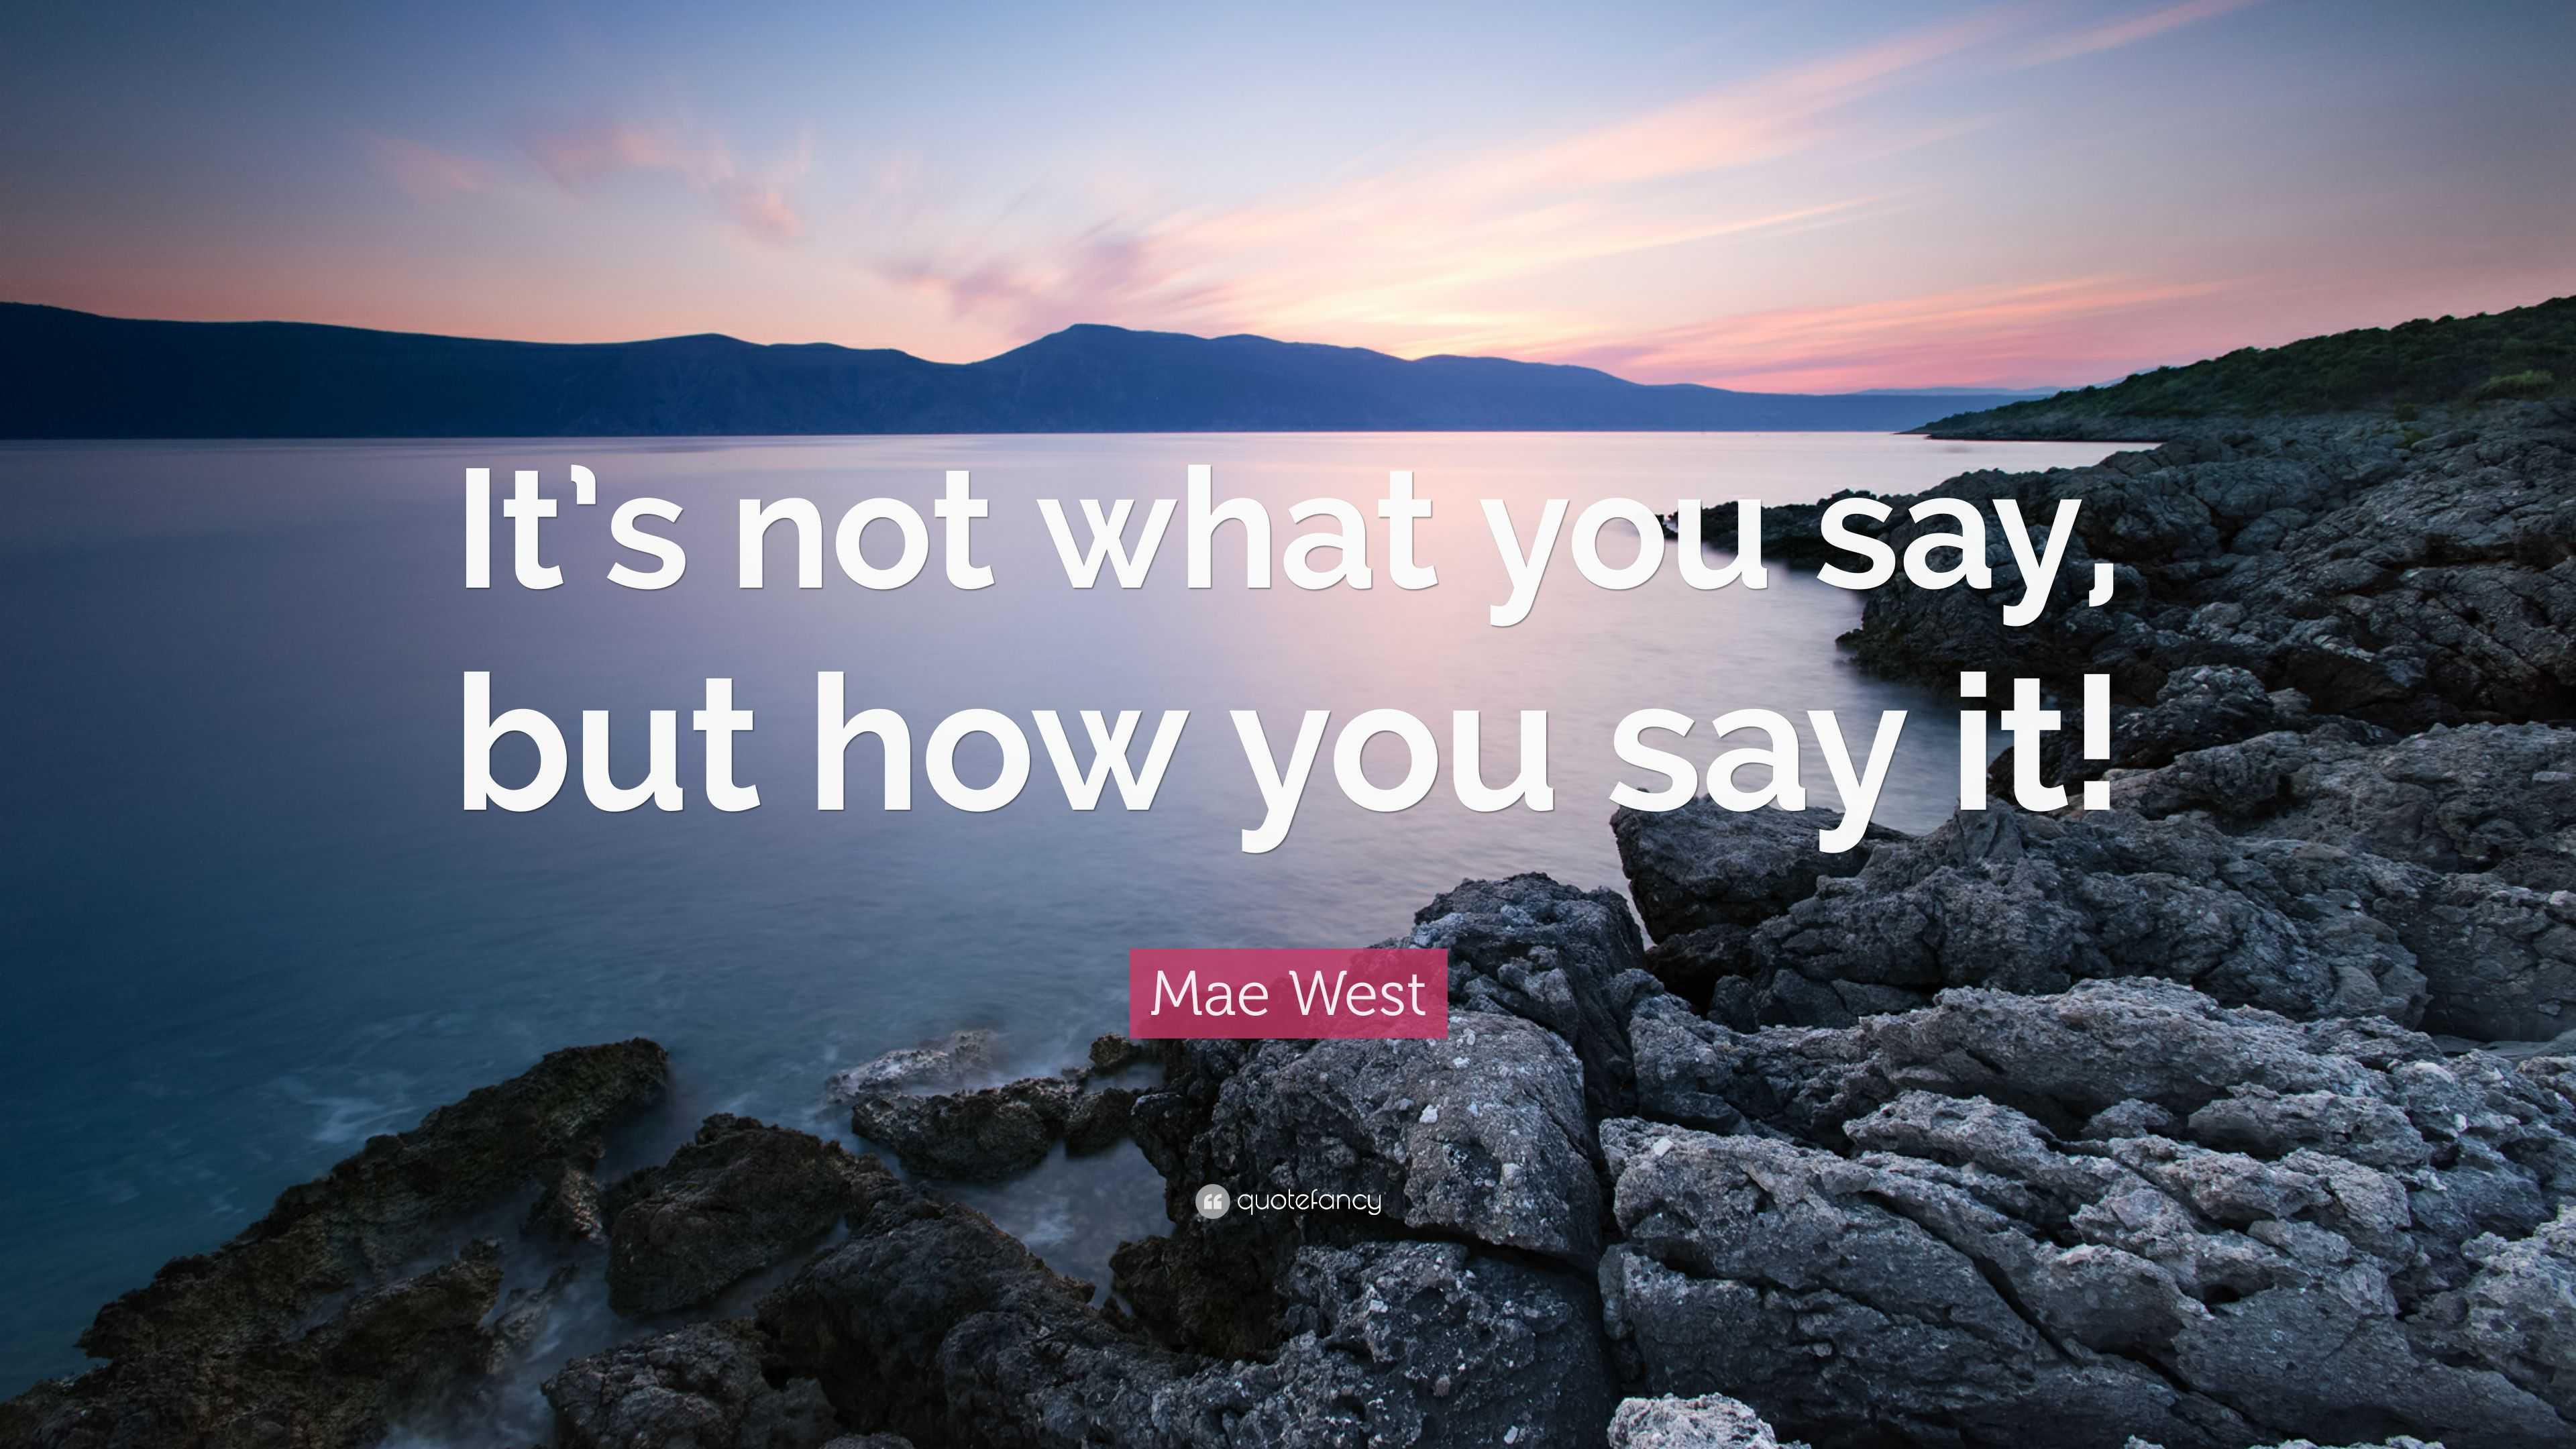 Mae West Quote: “It's not what you say, but how you say it!”